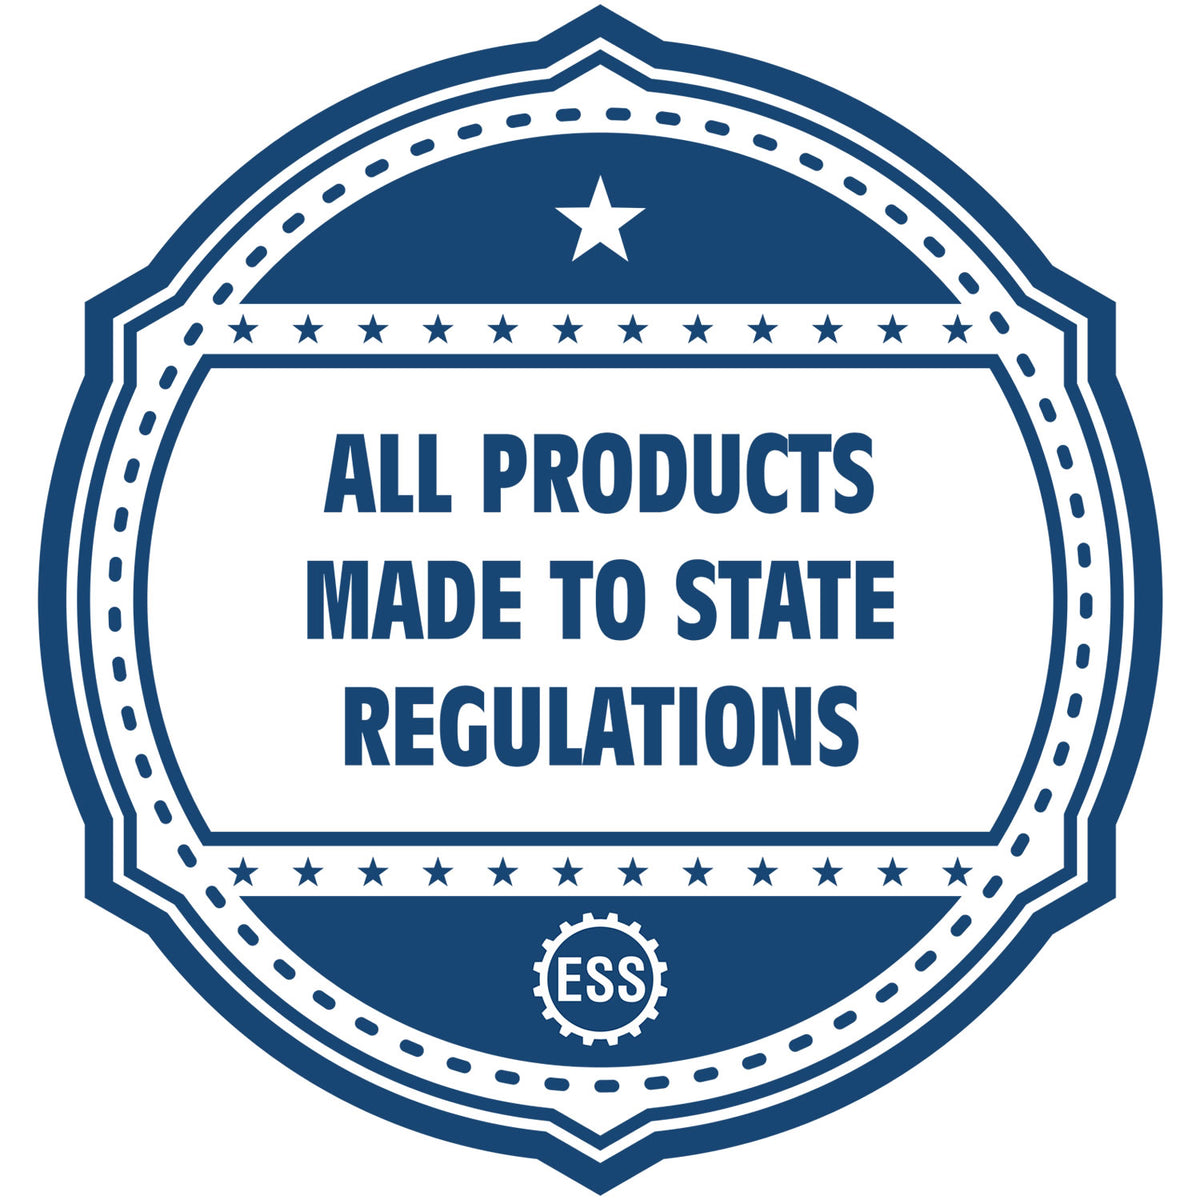 An icon or badge element for the Slim Pre-Inked Rectangular Notary Stamp for Florida showing that this product is made in compliance with state regulations.